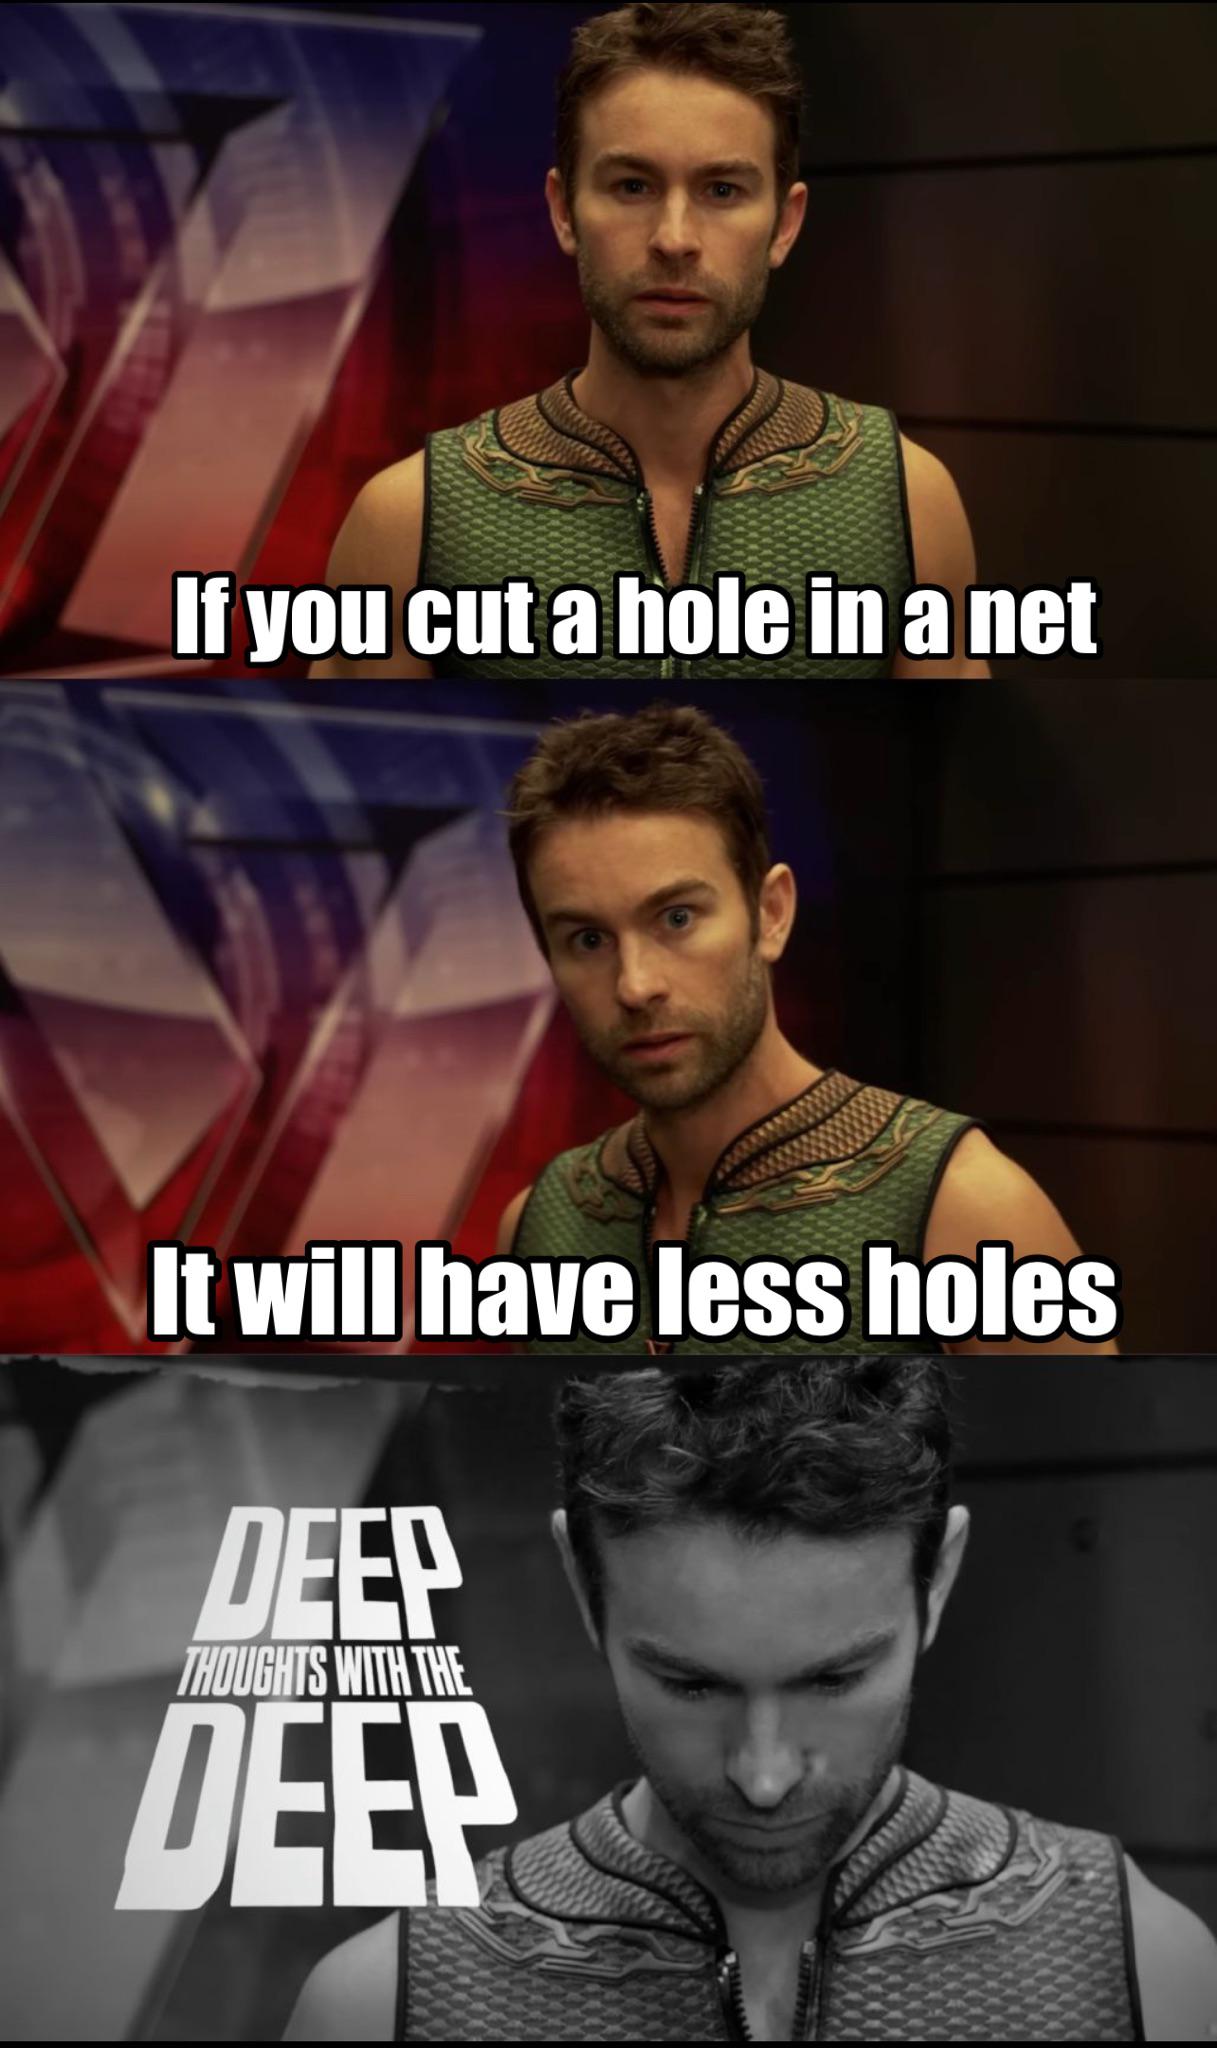 funny memes and pics - deep thoughts the deep - If you cut a hole in a net It will have less holes Deep Thoughts With The Deep